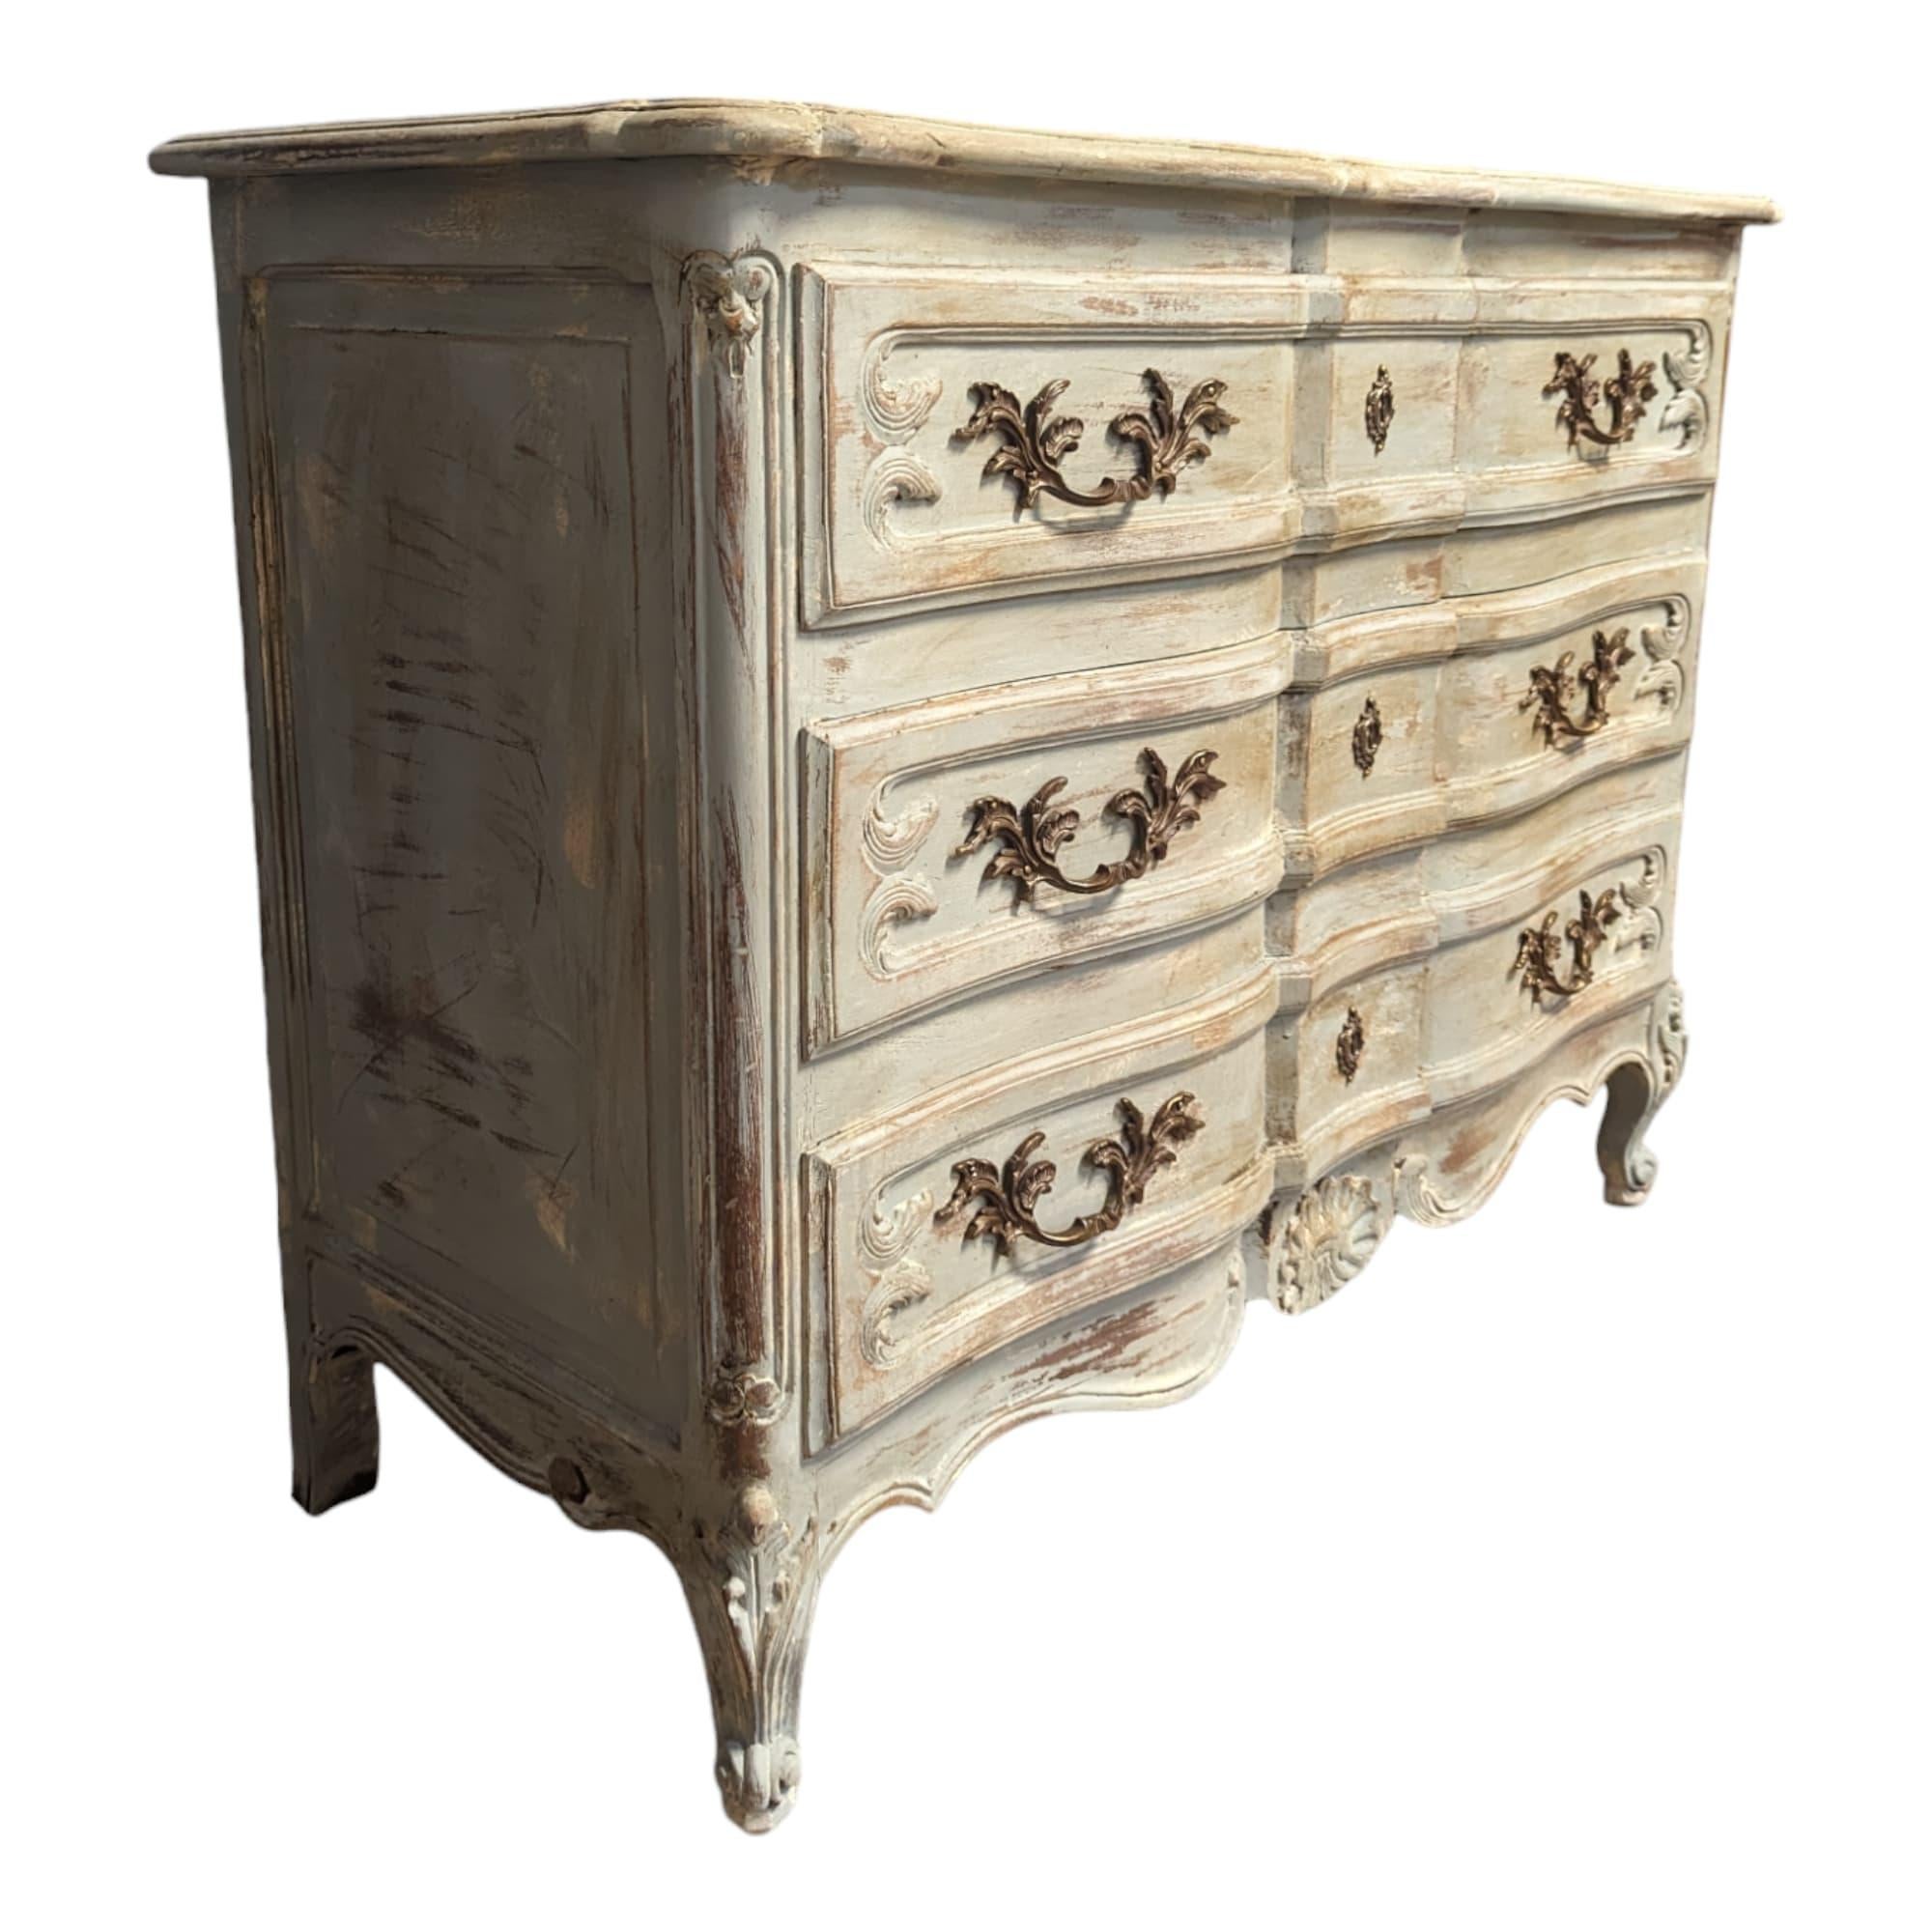 Coming from France. Immerse yourself in the timeless elegance of the Louis XV style with this superb patinated chest of drawers, a true jewel of French craftsmanship.

Inspired by the refined aesthetic of the period, this chest of drawers combines